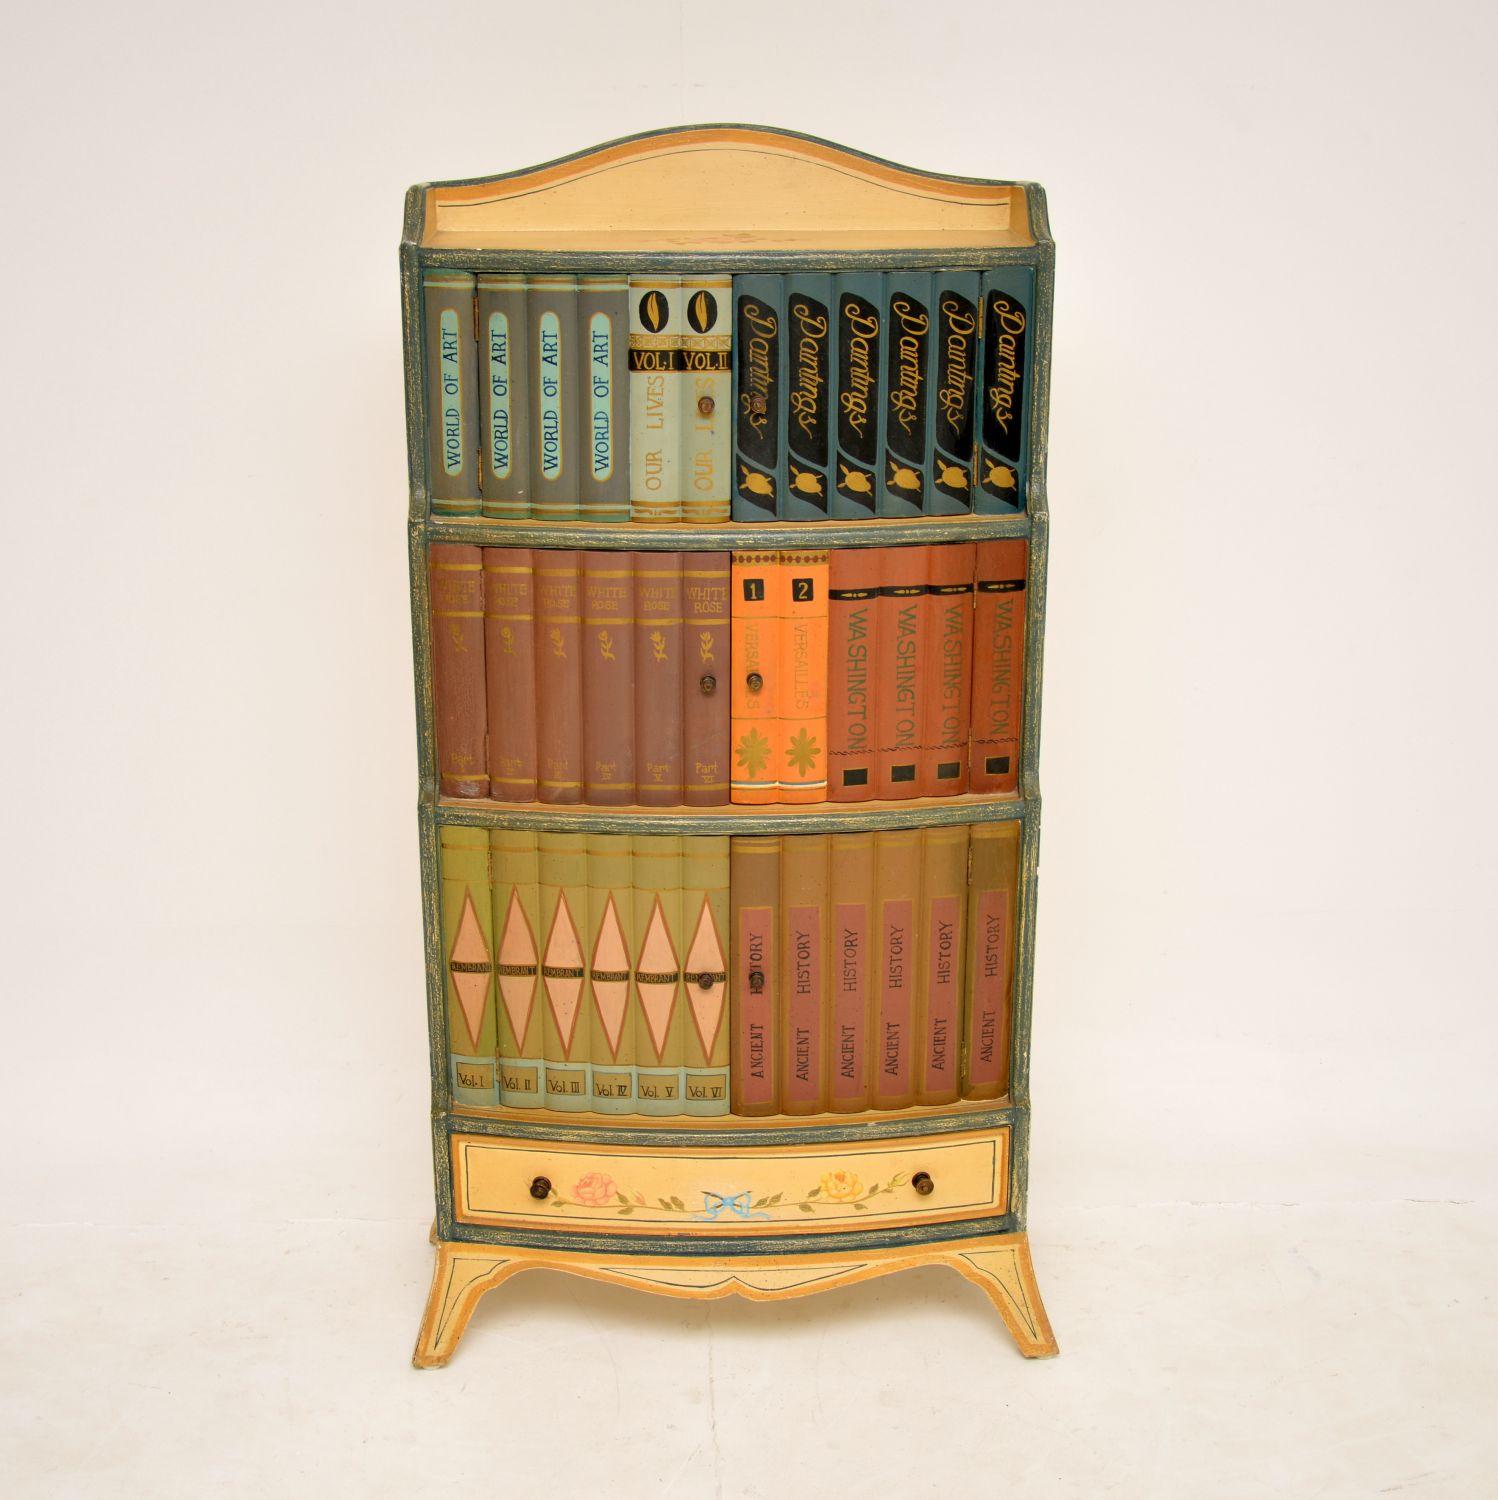 A fantastic antique painted bookcase cabinet of superb quality. This was made by the high end furniture manufacturer Maitland-Smith, it dates from around the 1960’s.

This is extremely well made and solidly built, with beautiful hand painted